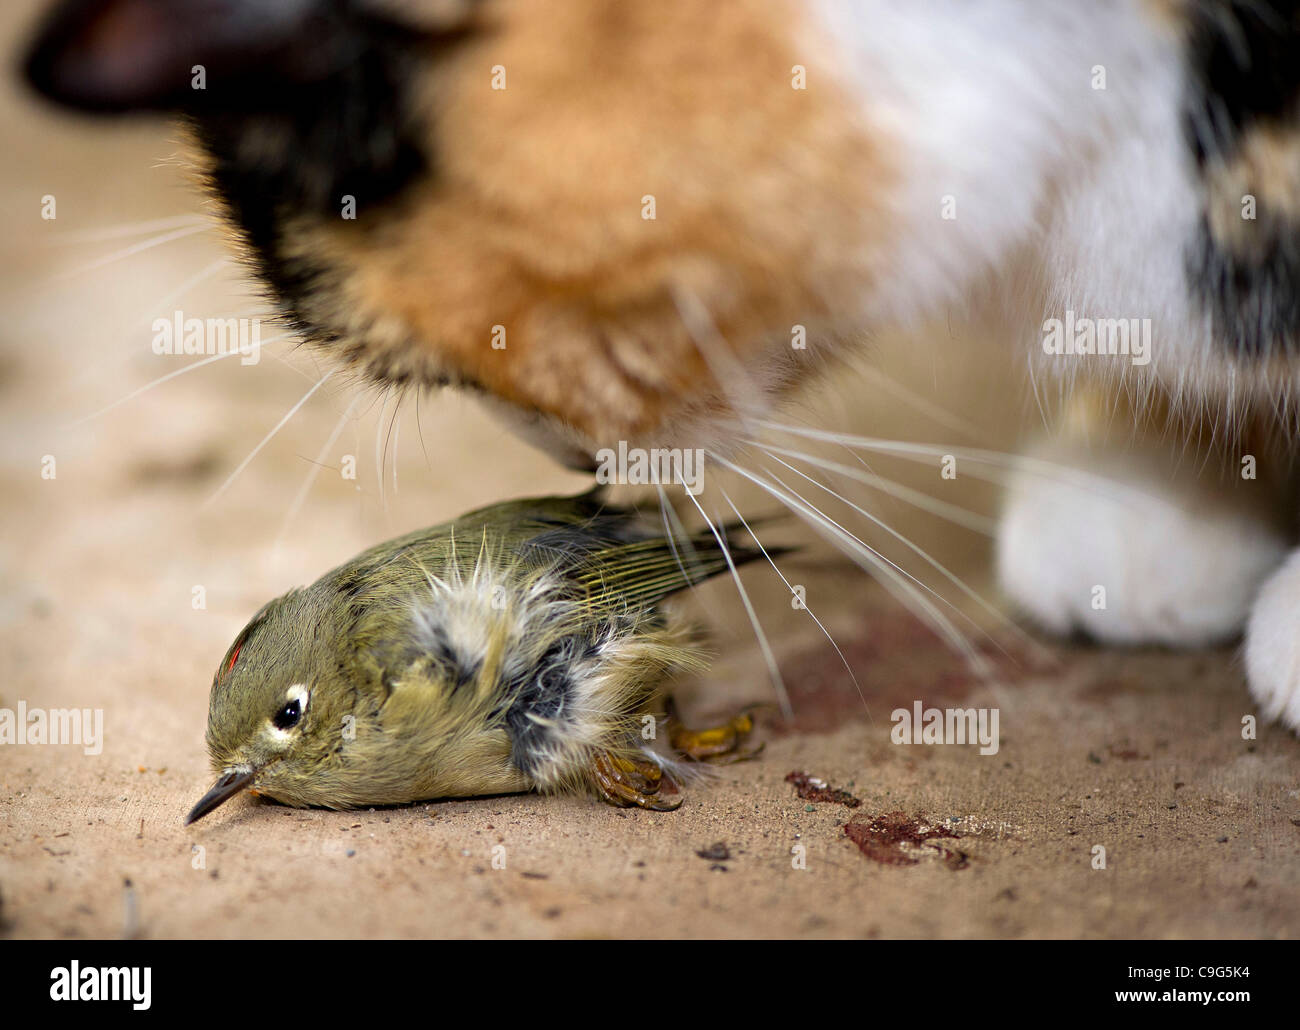 Dec. 20, 2011 - Oakland, Oregon, U.S - A domestic cat sniffs a small stunned songbird before killing it near a home in Oakland. According to a recent estimate from the American Bird Conservancy, domestic cats kill anywhere from 500 million to a billion birds every year.  Stock Photo